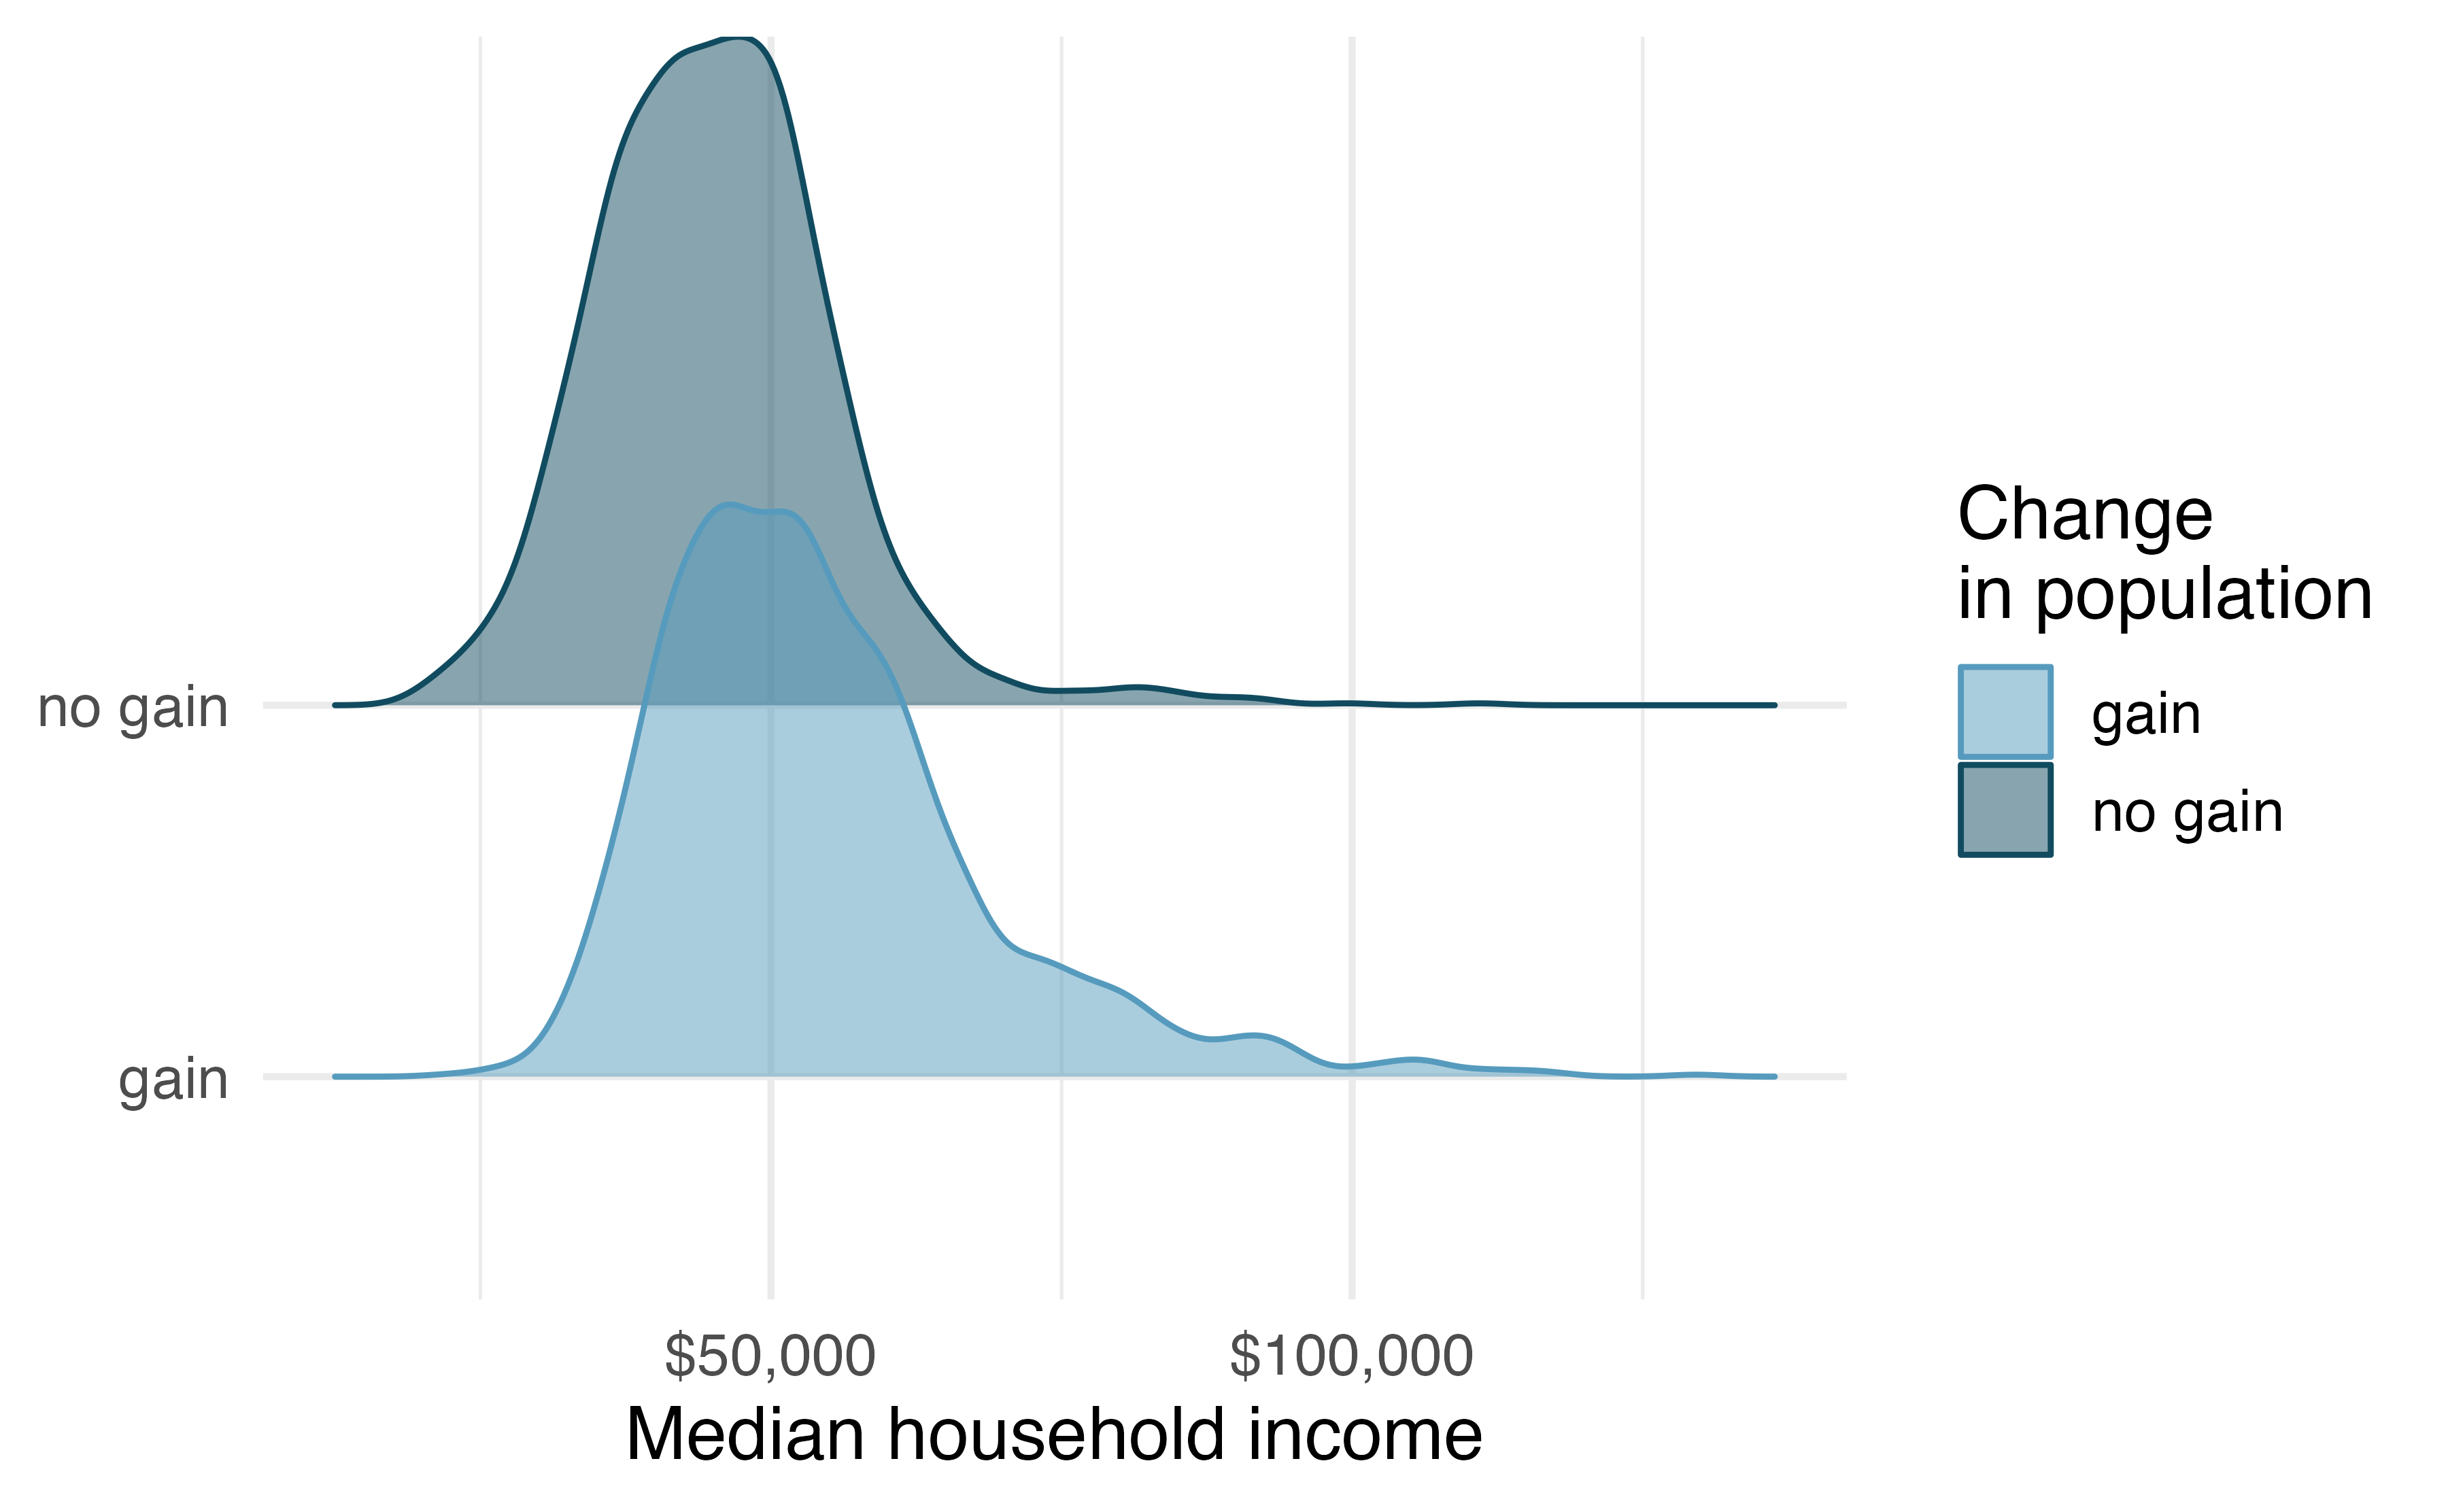 Ridge plot for median household income, where counties are split by whether there was a population gain or not. The figure shows that the counties who have had a population gain have a household income distribution with a higher center.